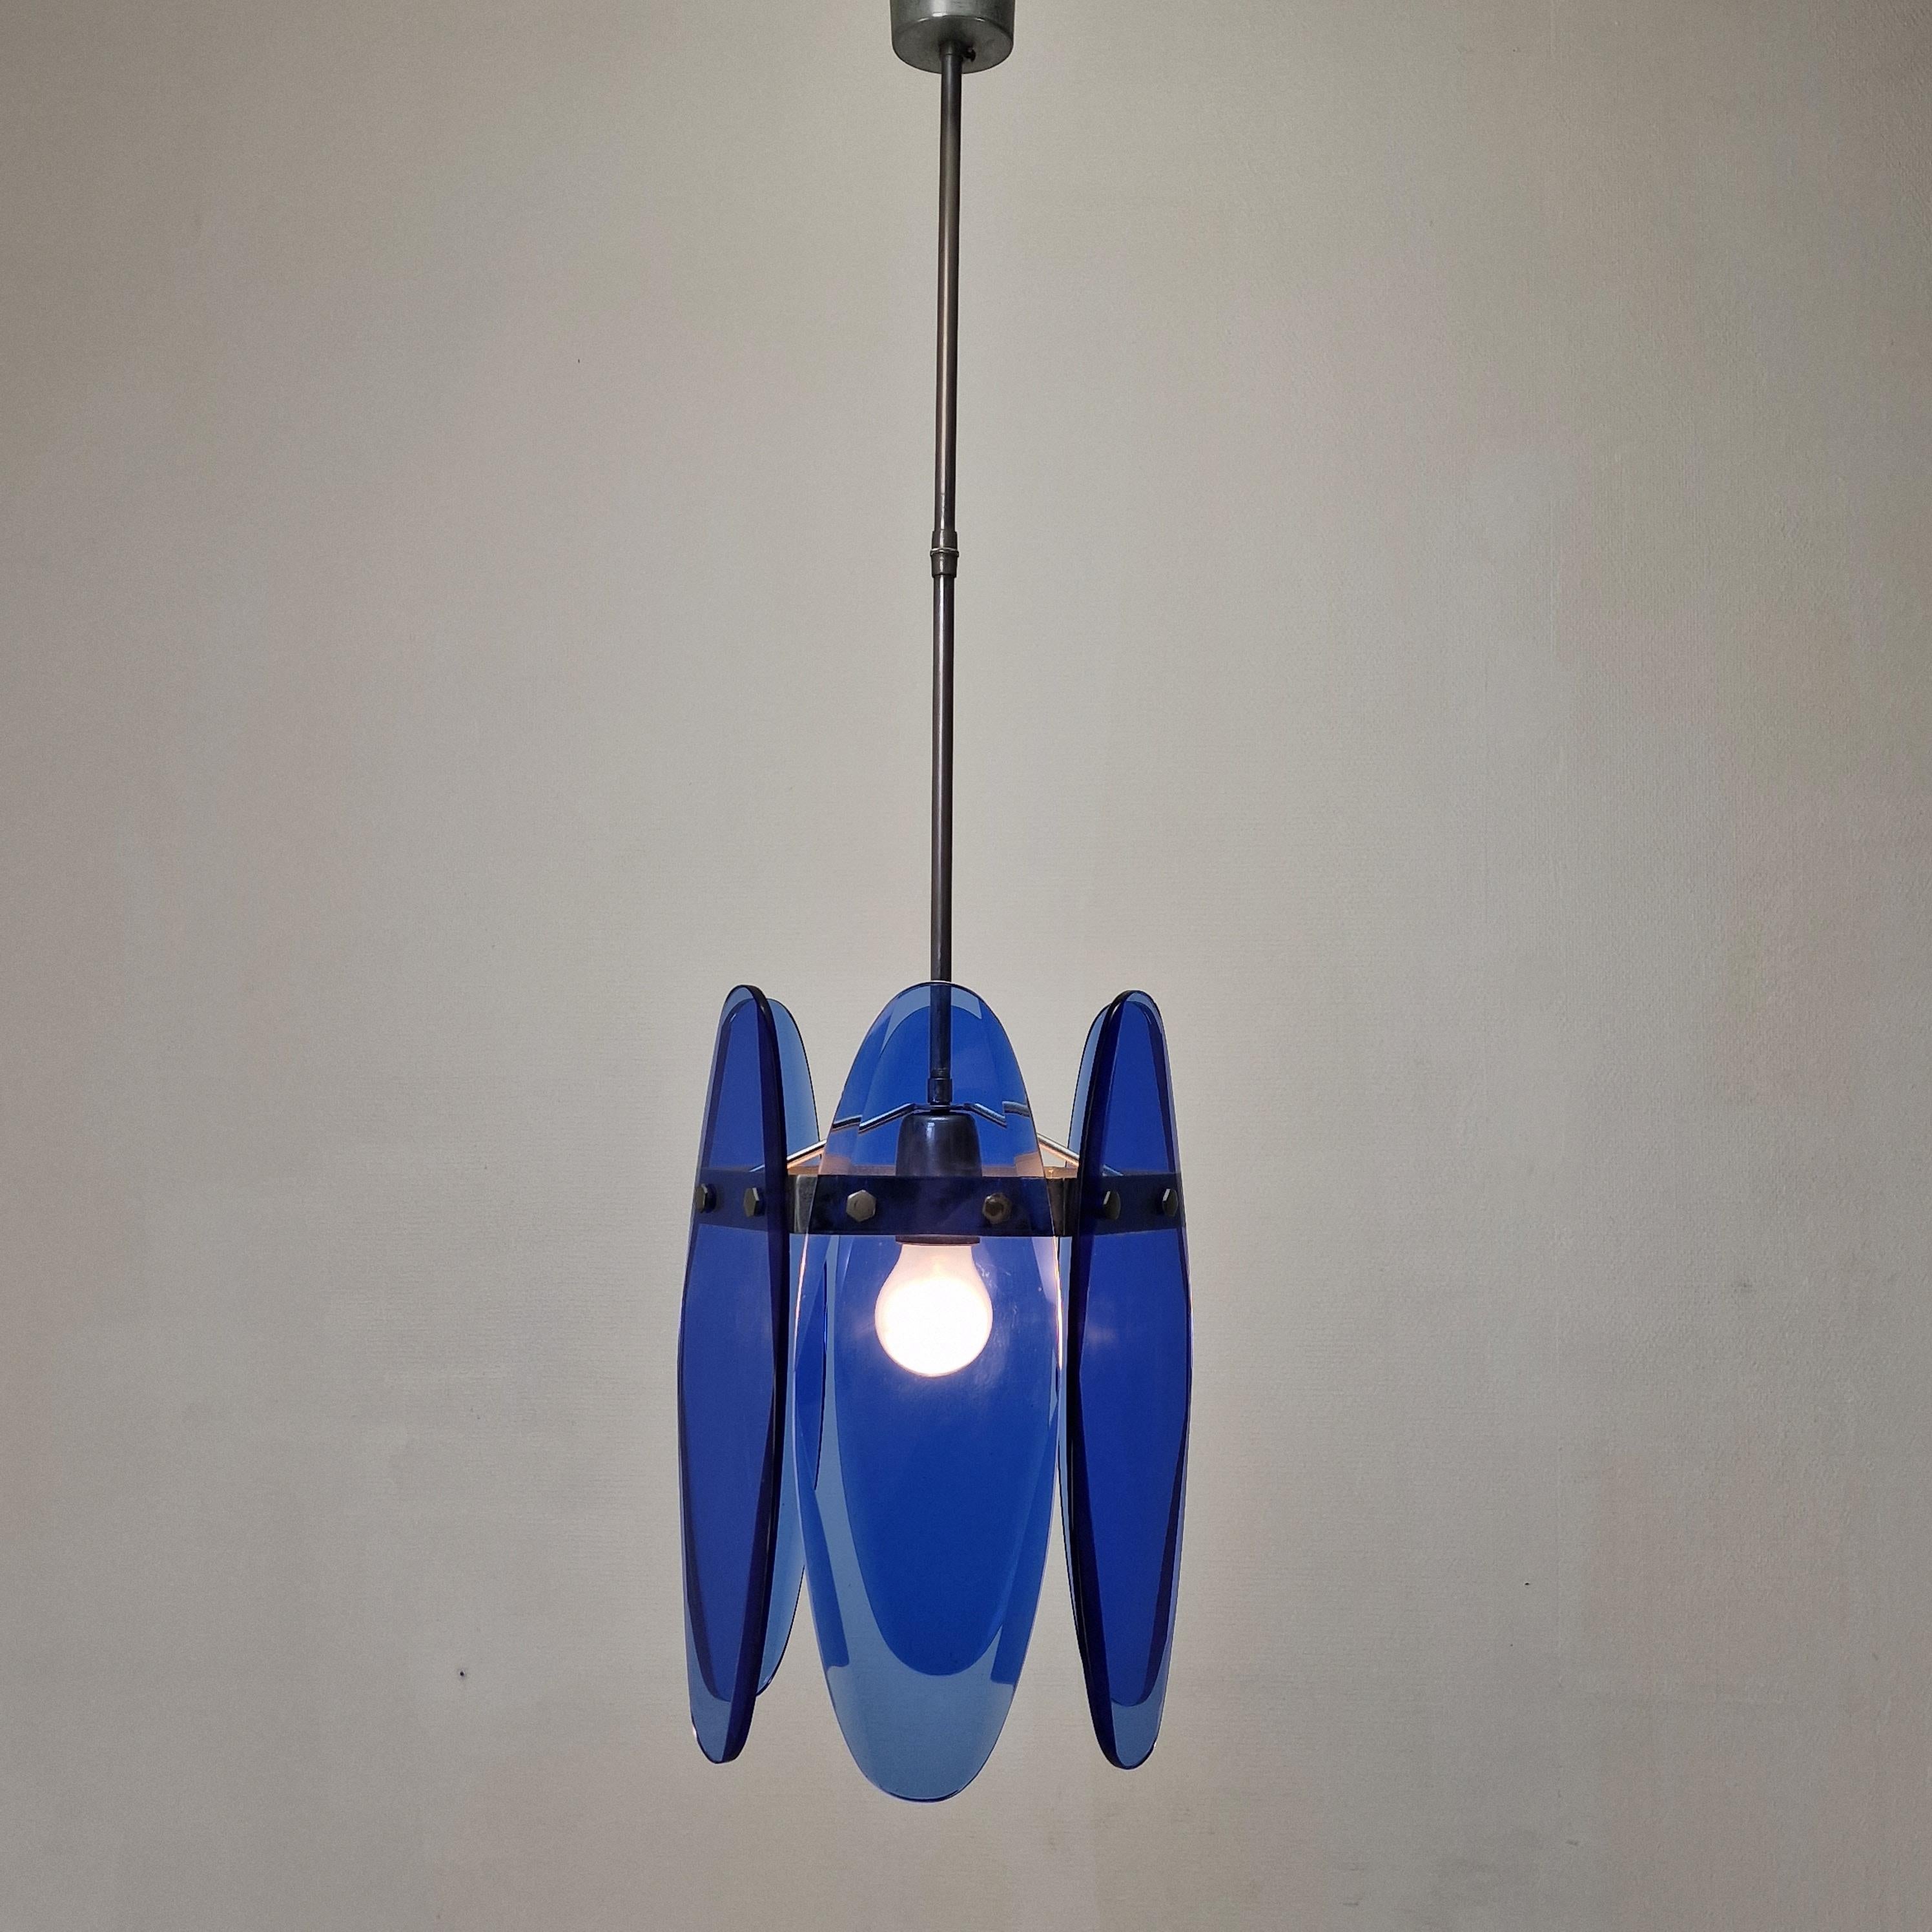 Italian Mid-Century Modern Blue Glass Chandelier or Pendant by Veca, Italy 1970's For Sale